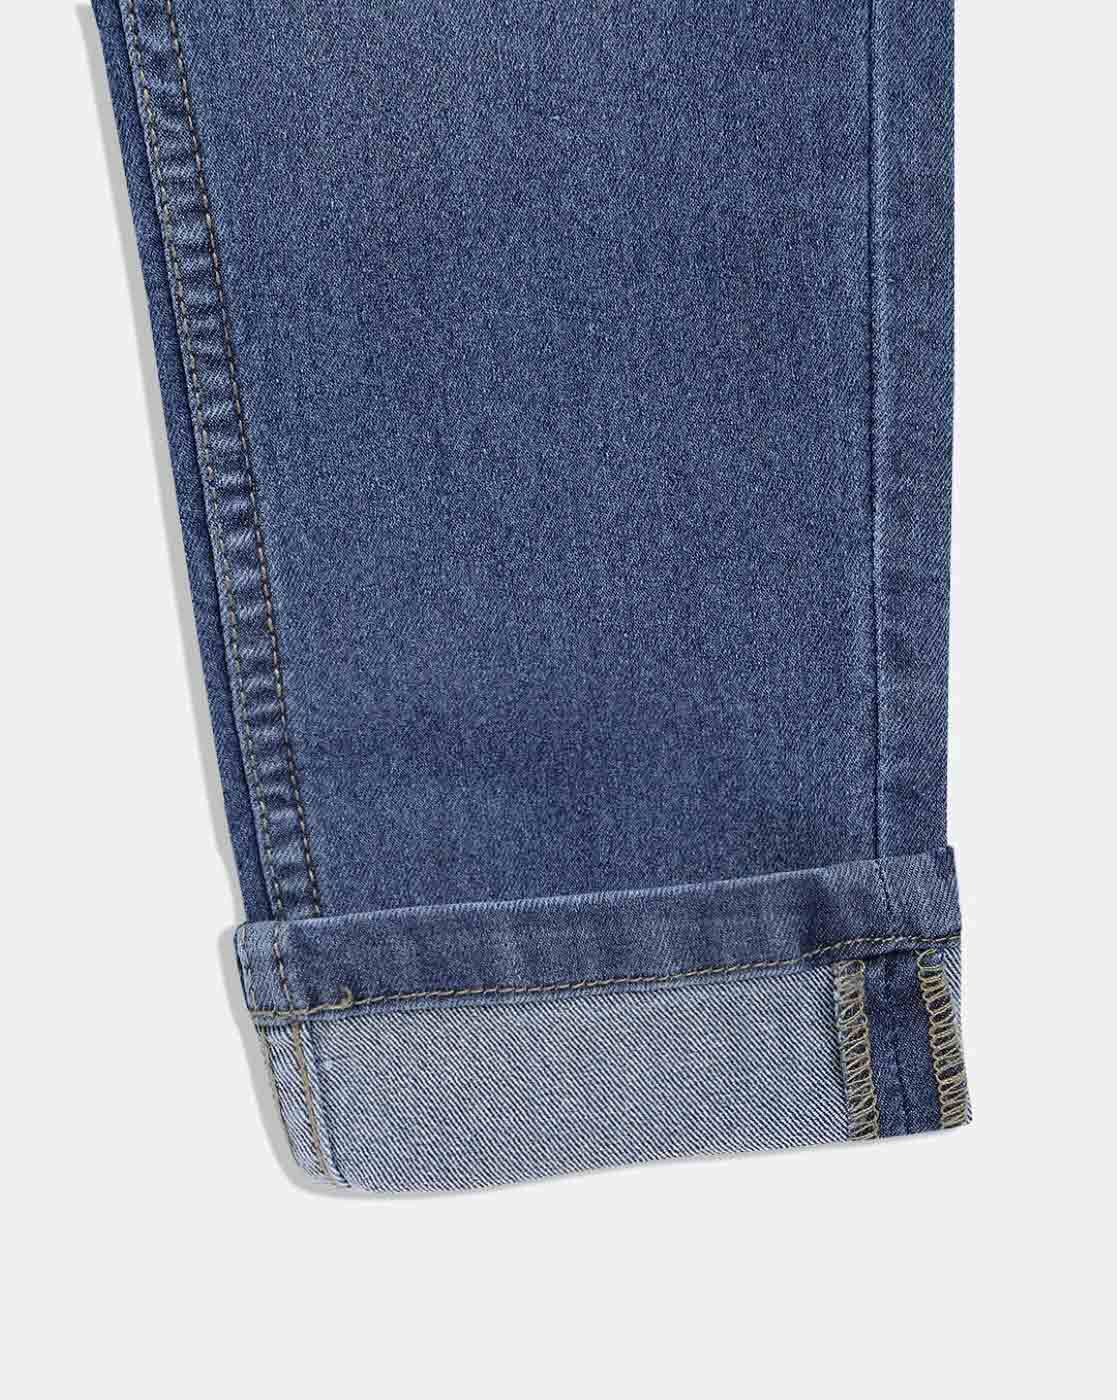 Buy Blue Jeans for Boys by URBANO JUNIORS Online